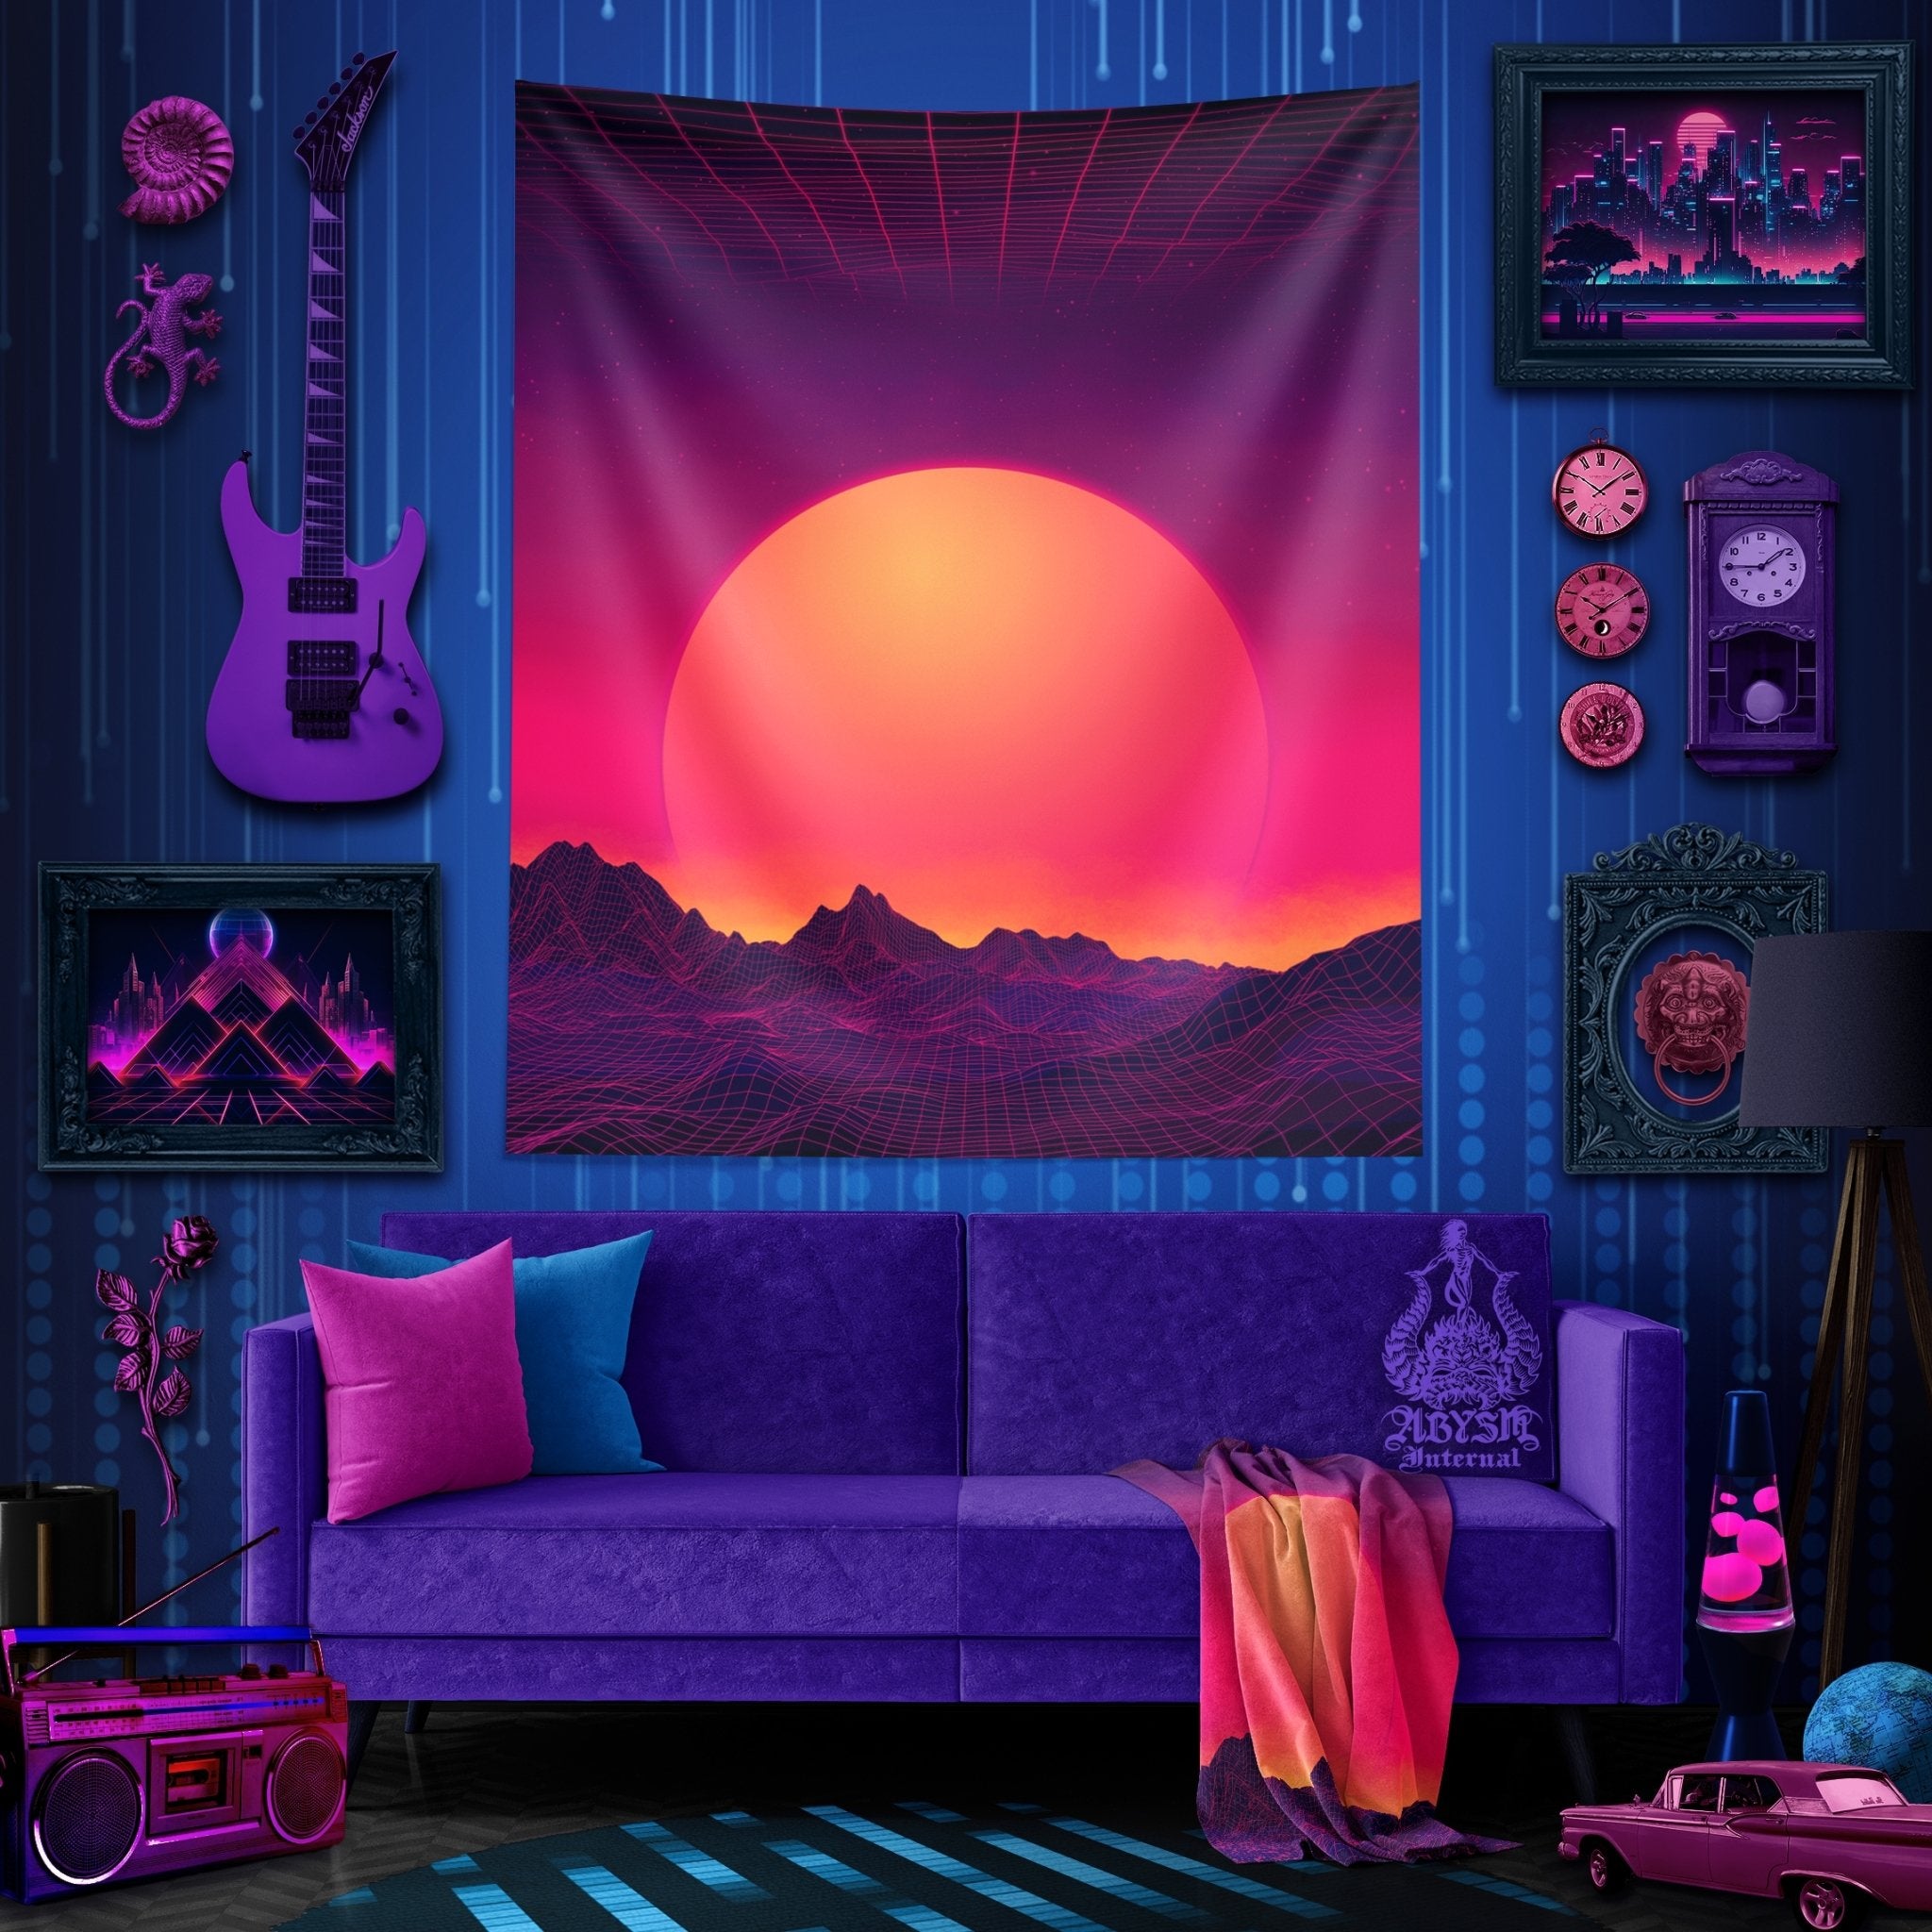 Vaporwave Tapestry, Synthwave Wall Hanging, Retrowave 80s Home Decor, Art Print, Eclectic and Funky - Sunset - Abysm Internal